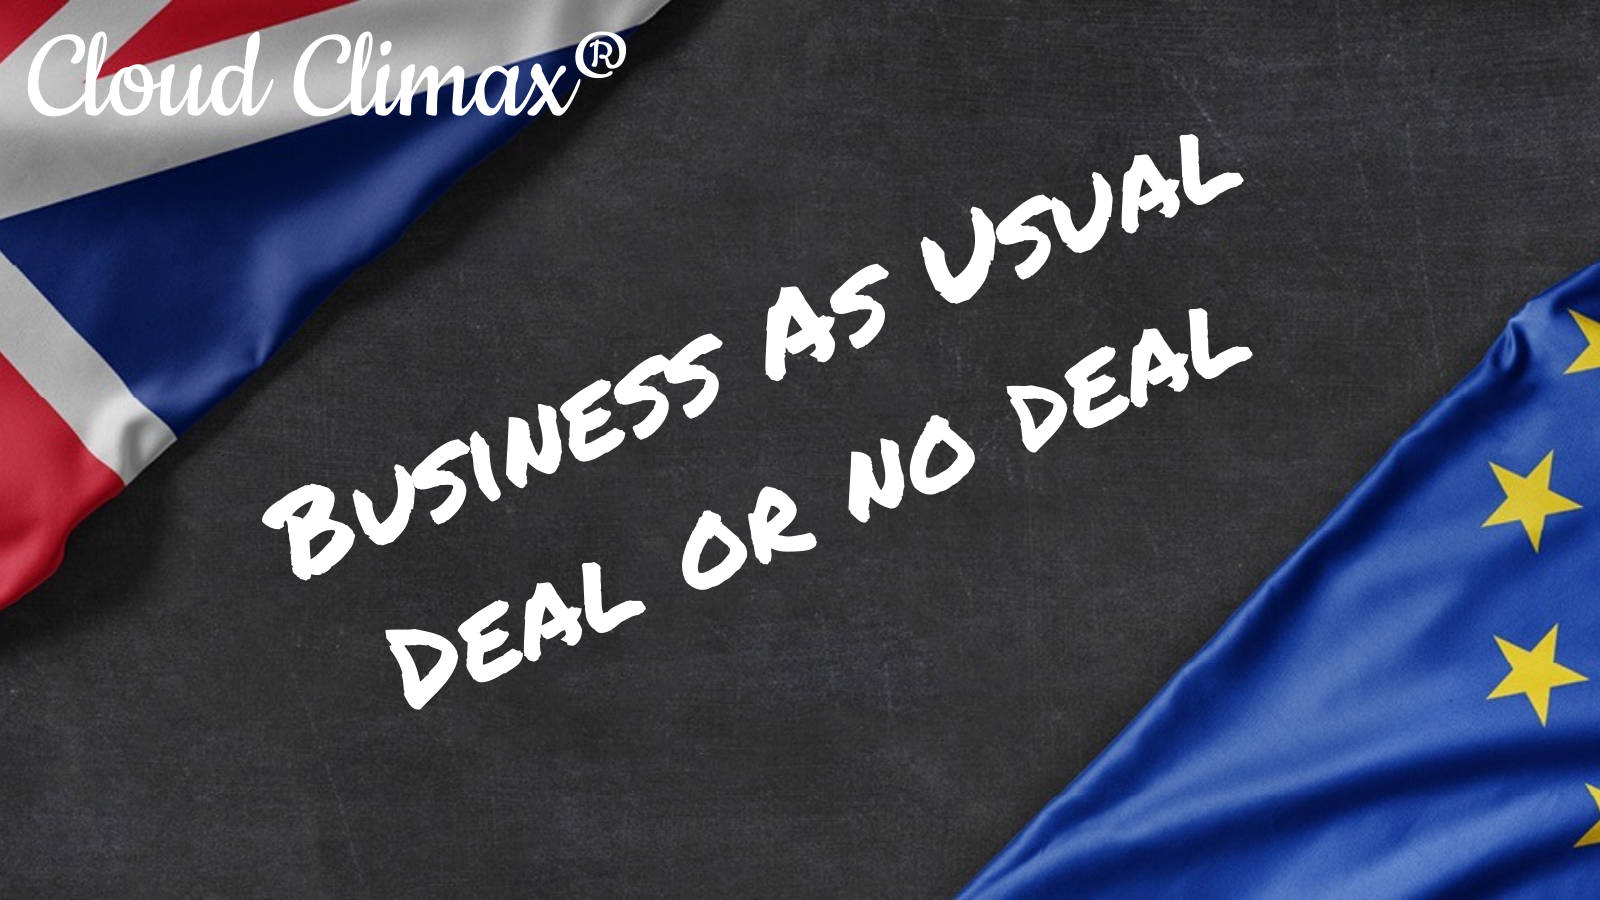 Brexit Business as usual deal or no deal